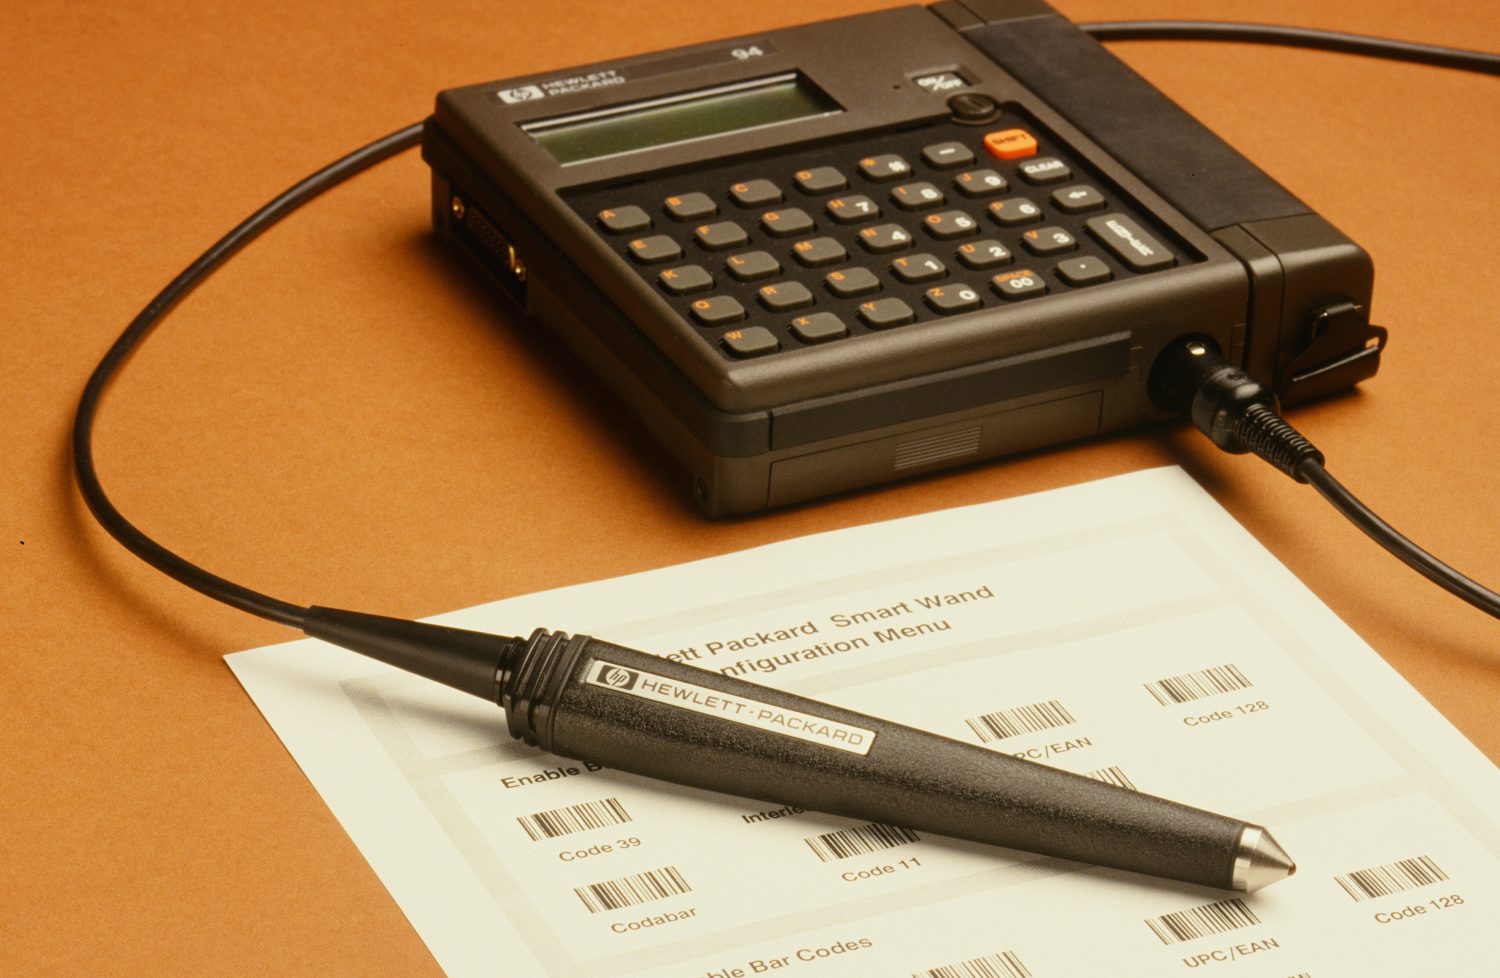 Photo of the HP 94 Handheld Computer with attached barcode wand.